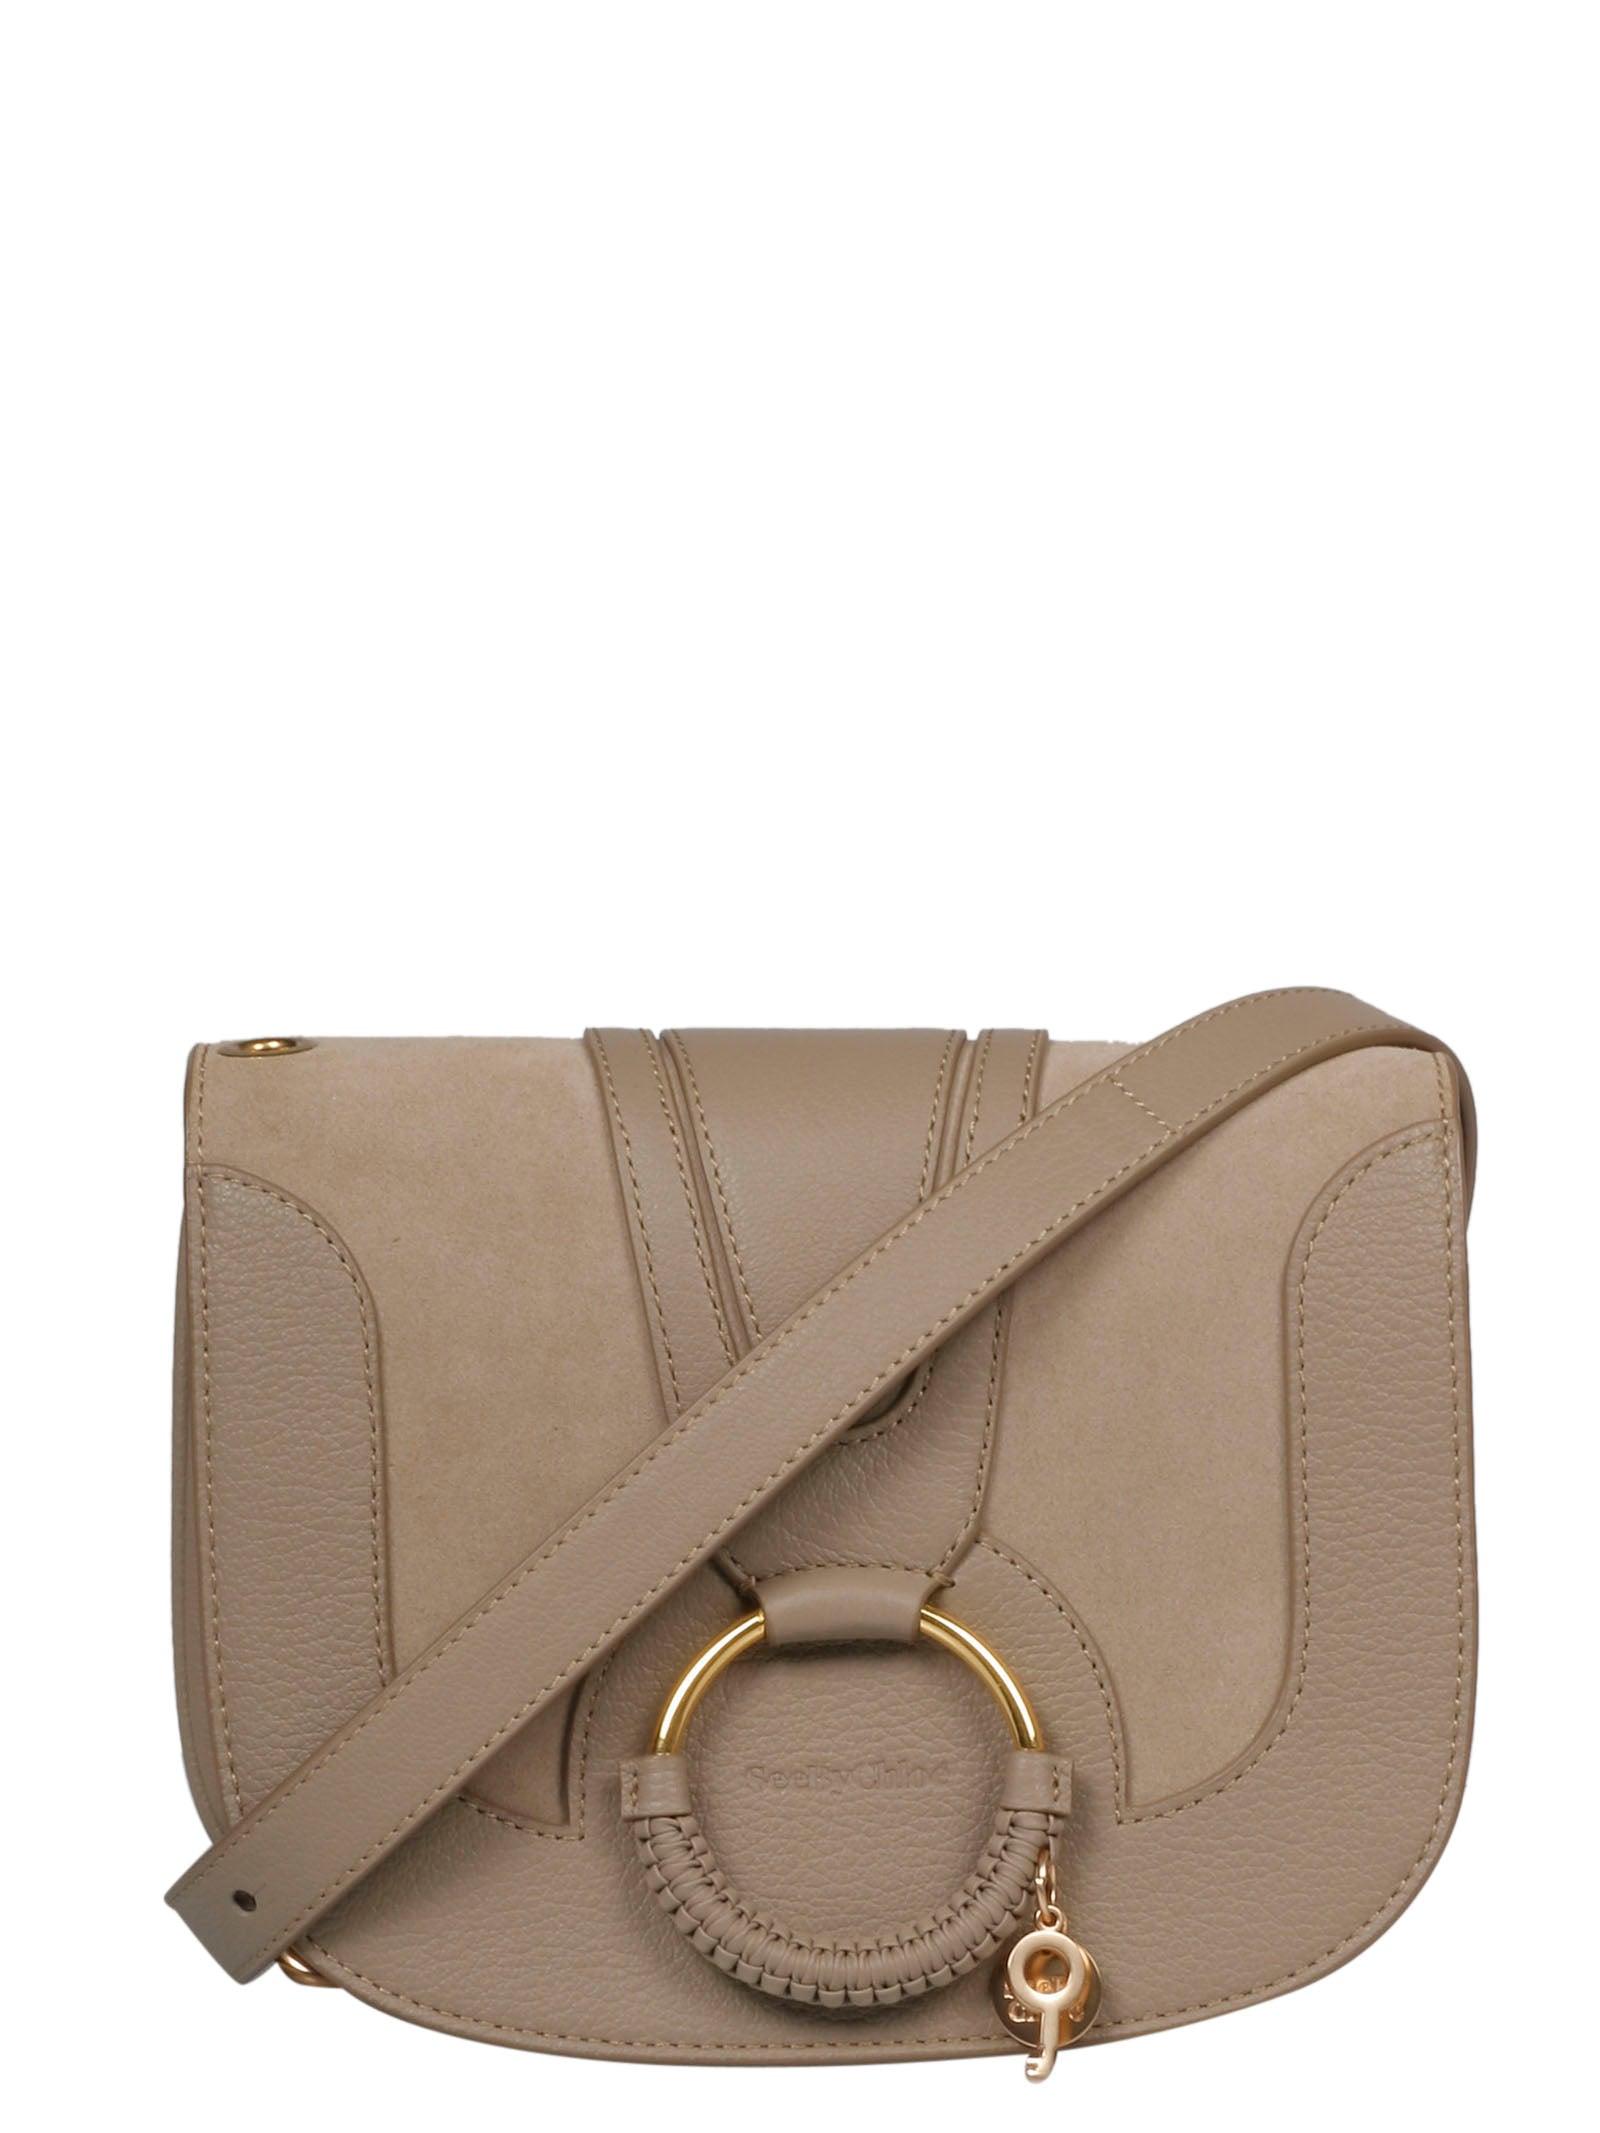 See By Chloé Leather Hana Shoulder Bag in Grey (Gray) - Save 3% - Lyst